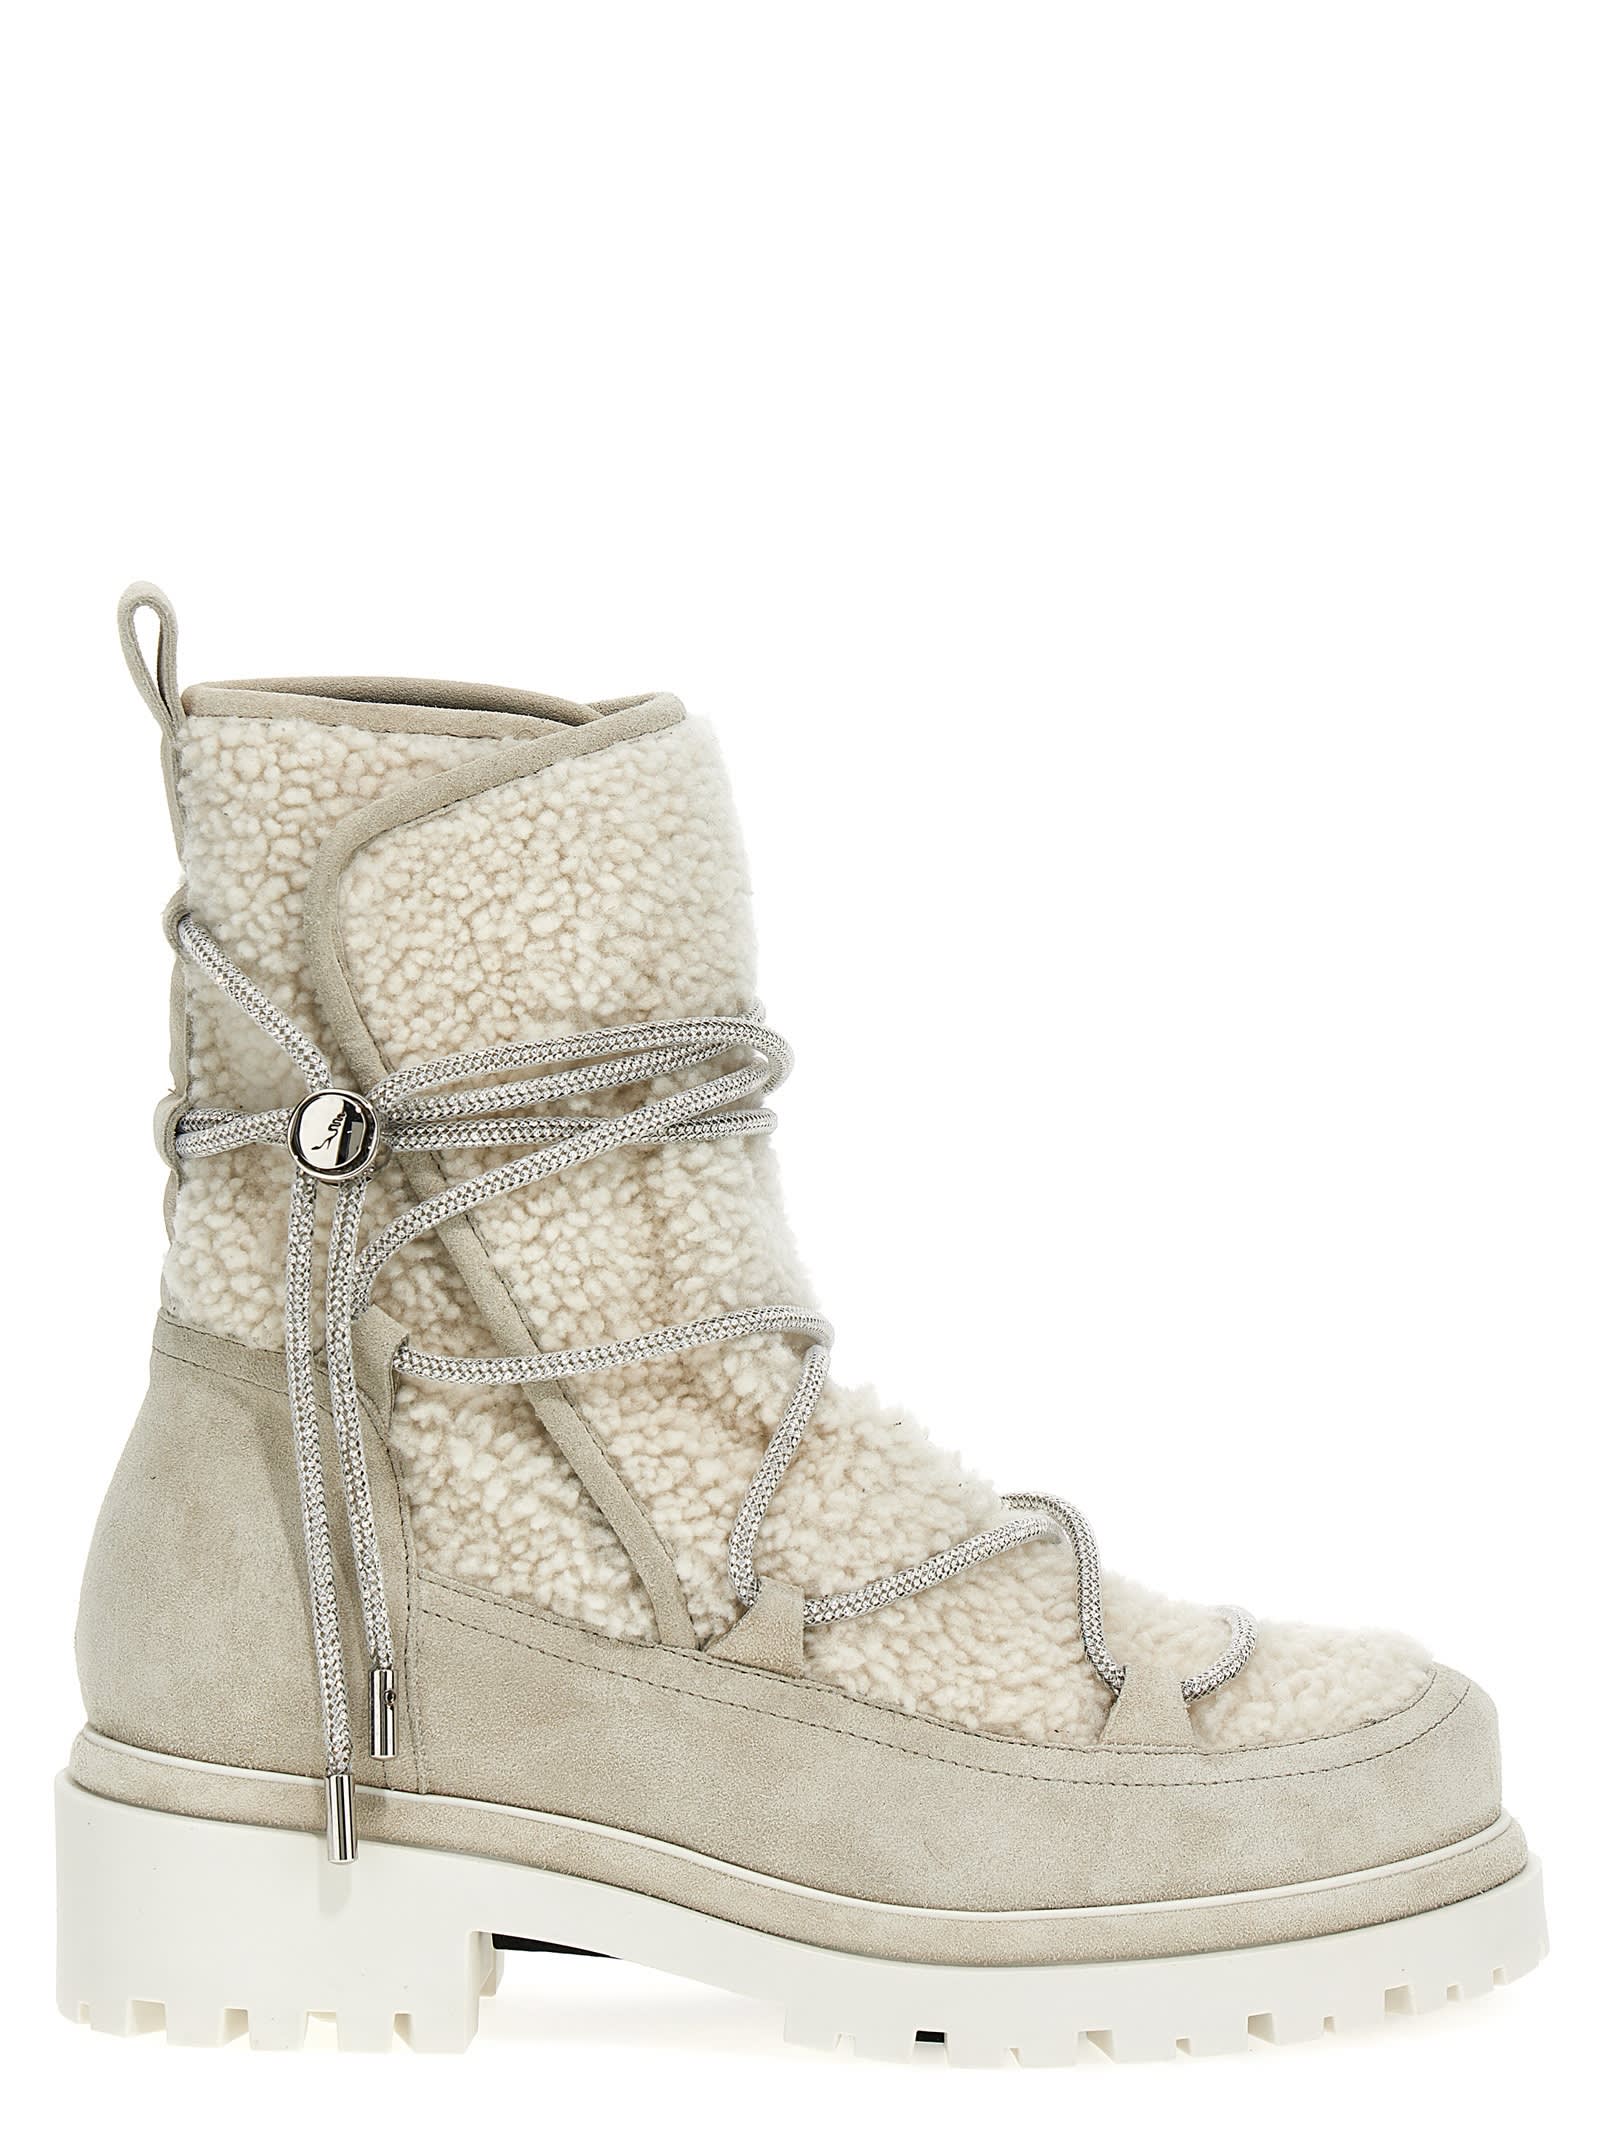 René Caovilla Suede Shearling Ankle Boots